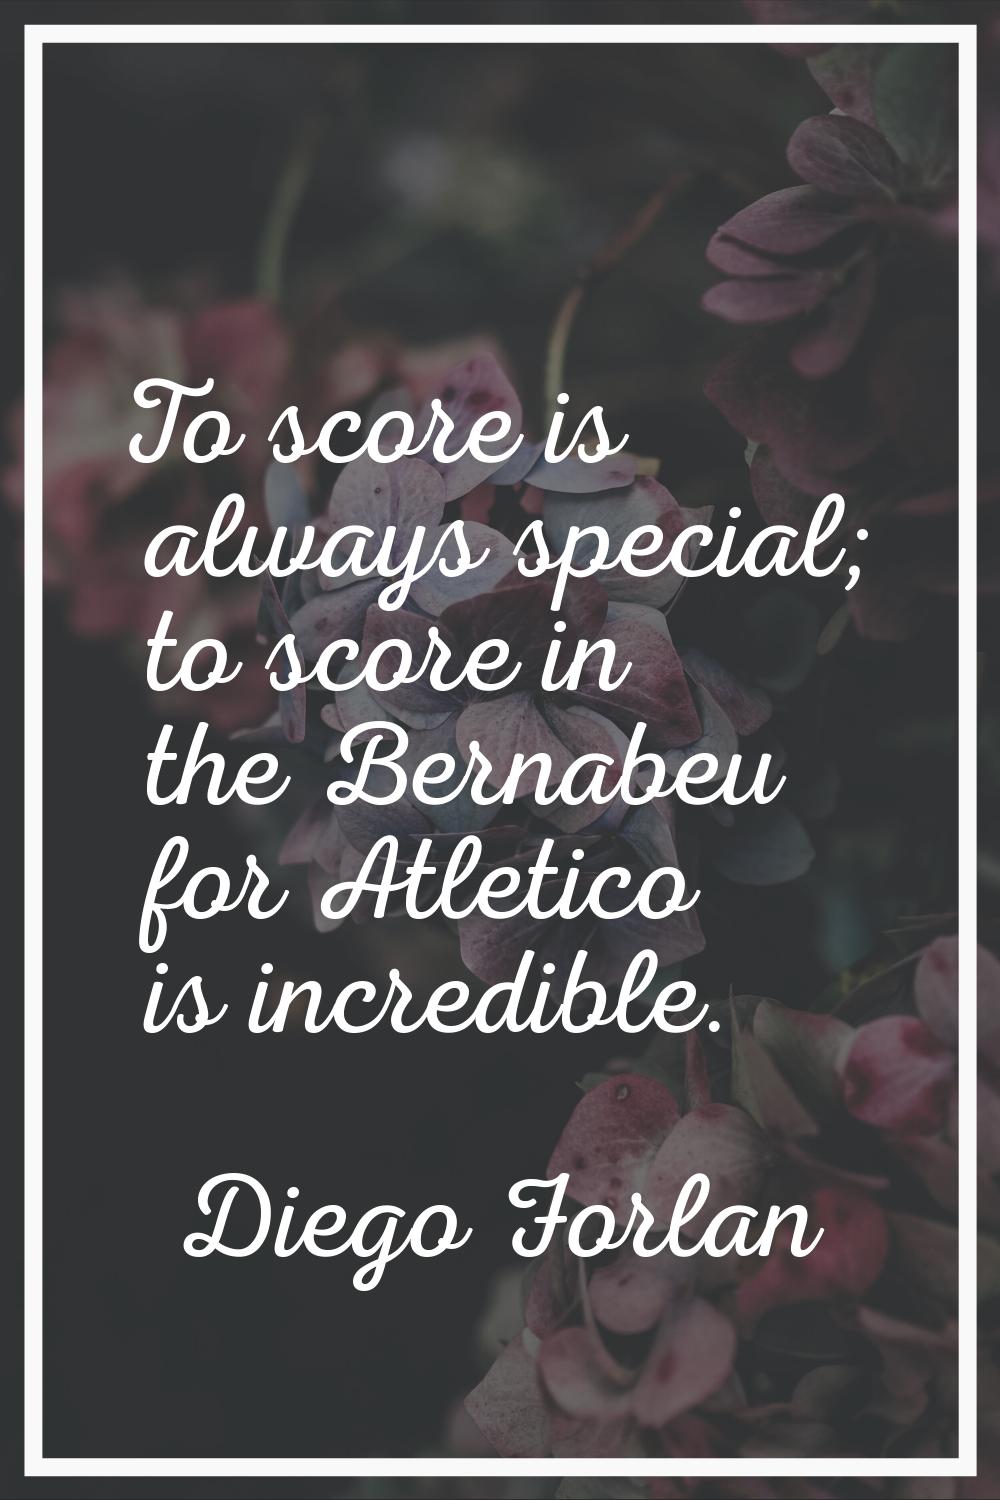 To score is always special; to score in the Bernabeu for Atletico is incredible.